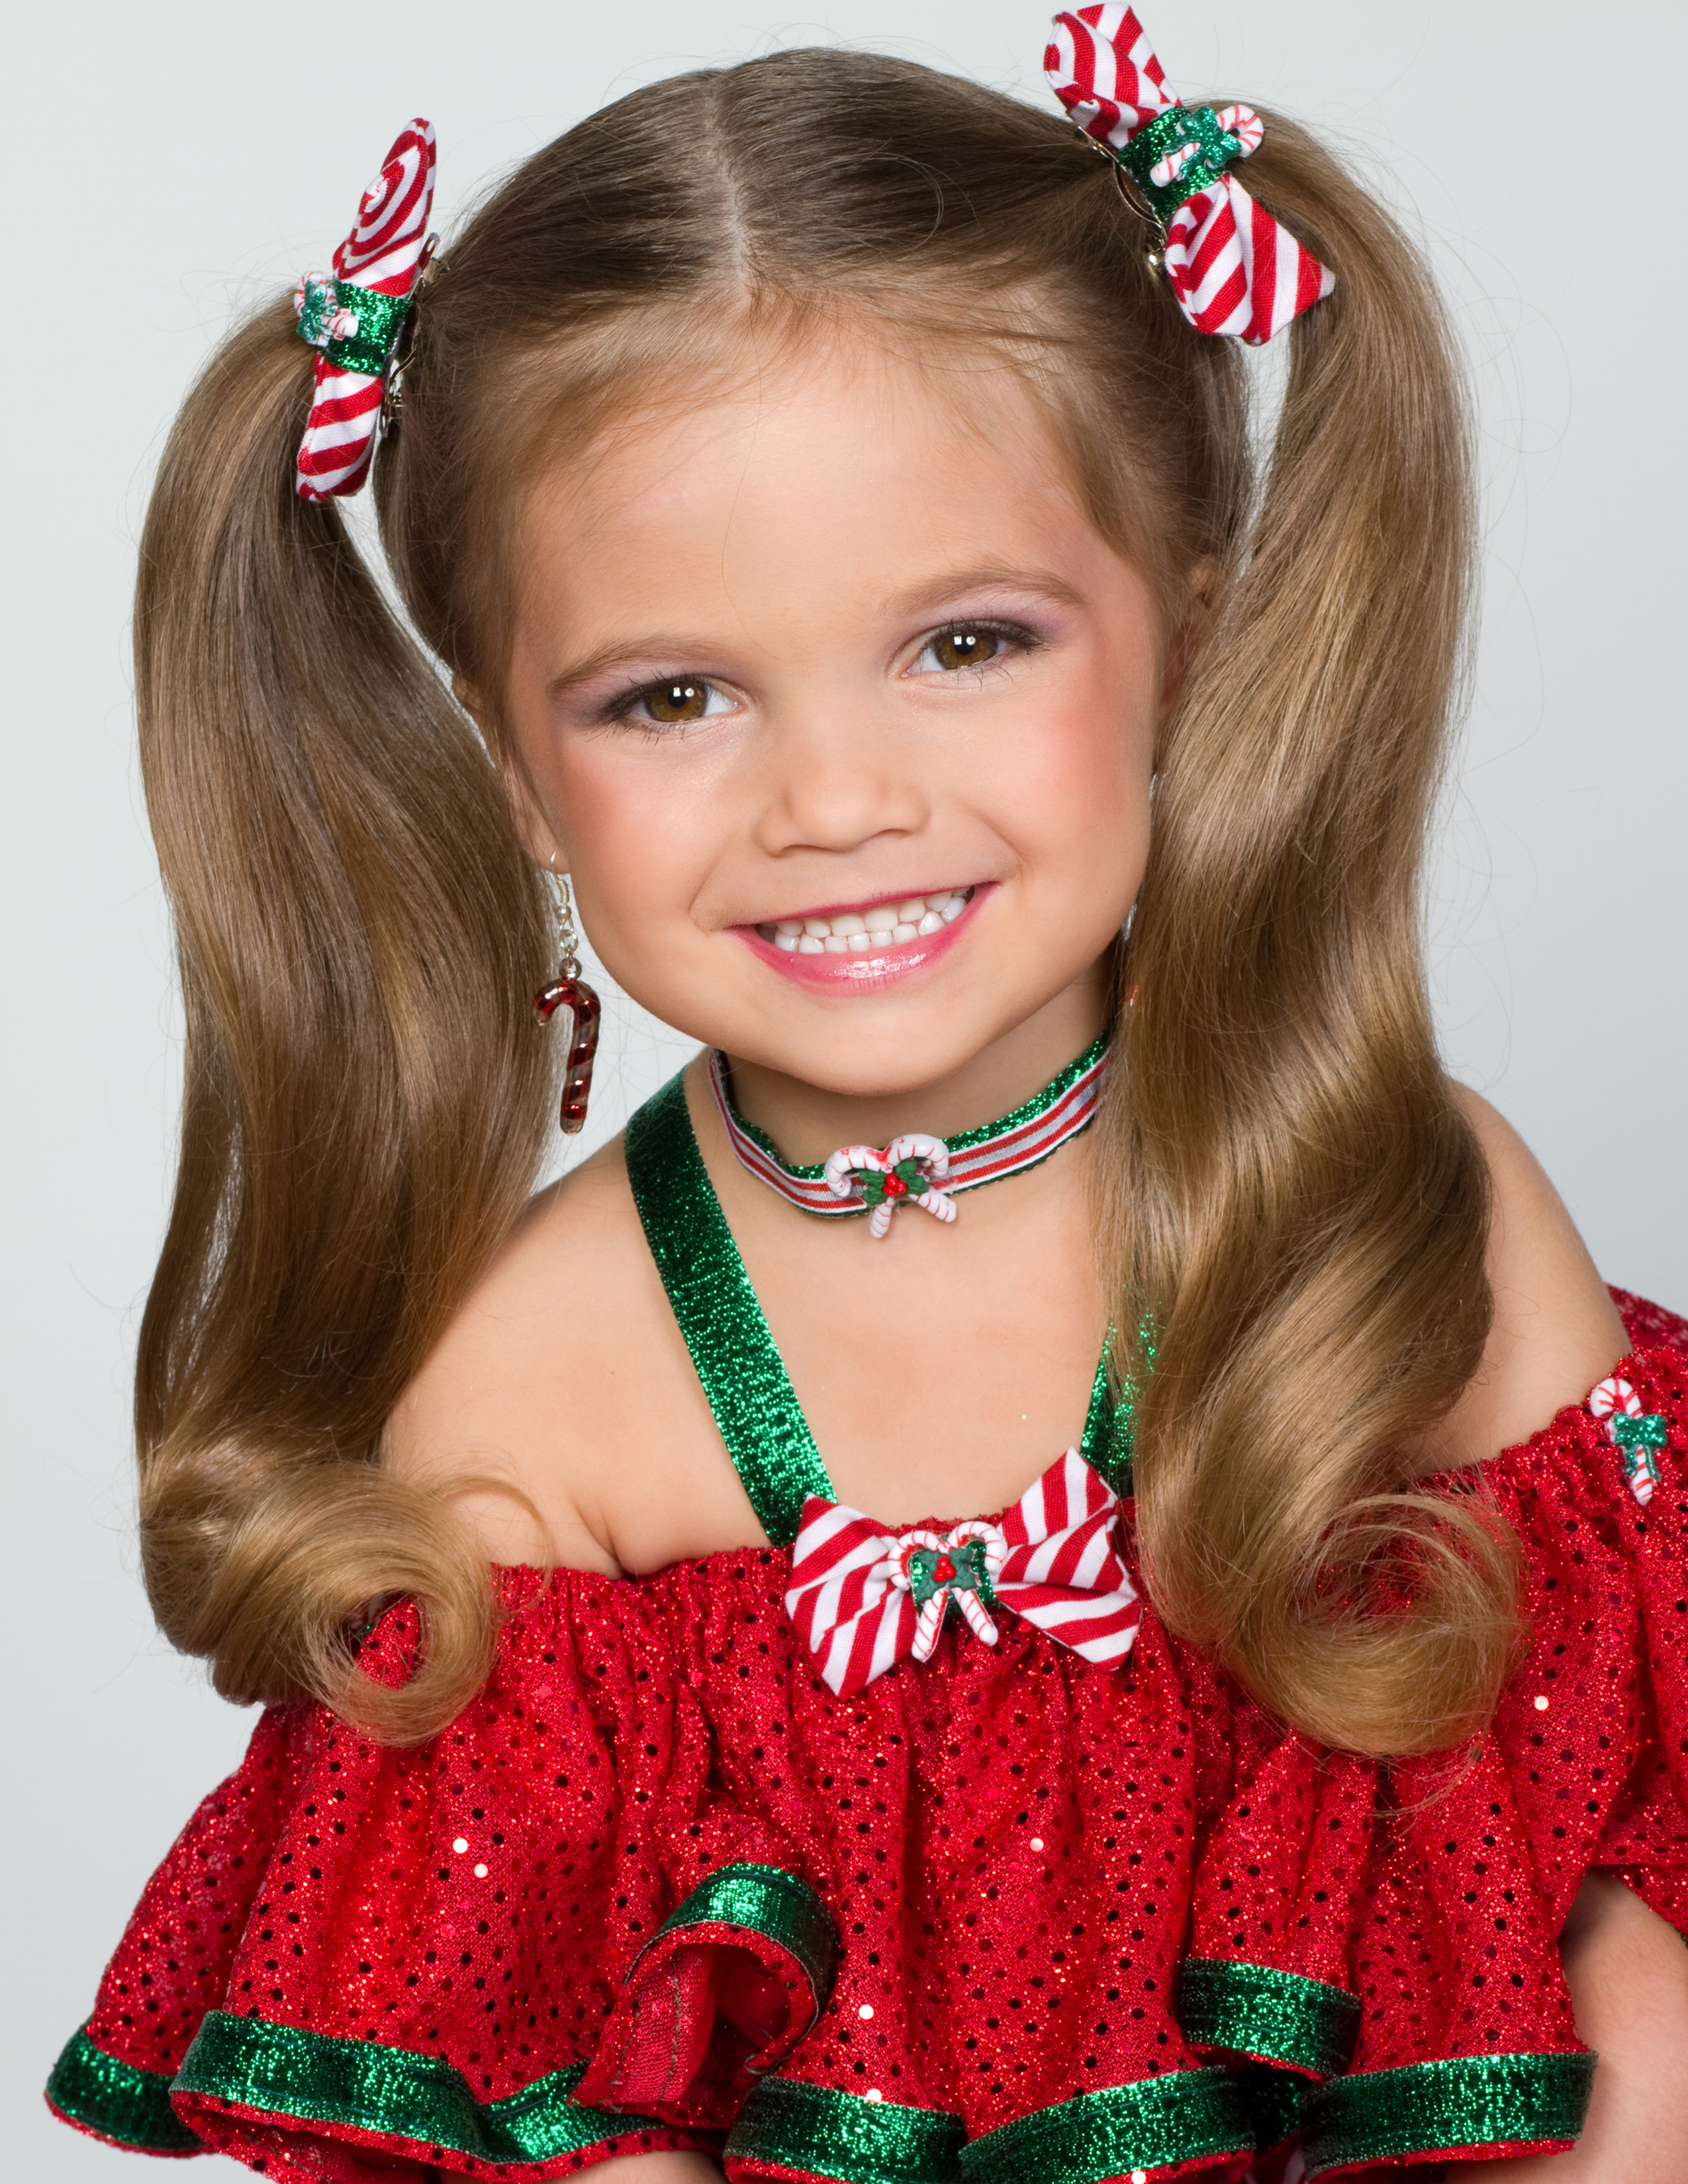 Peppermint Paisley. As seen on Toddlers and Tiaras